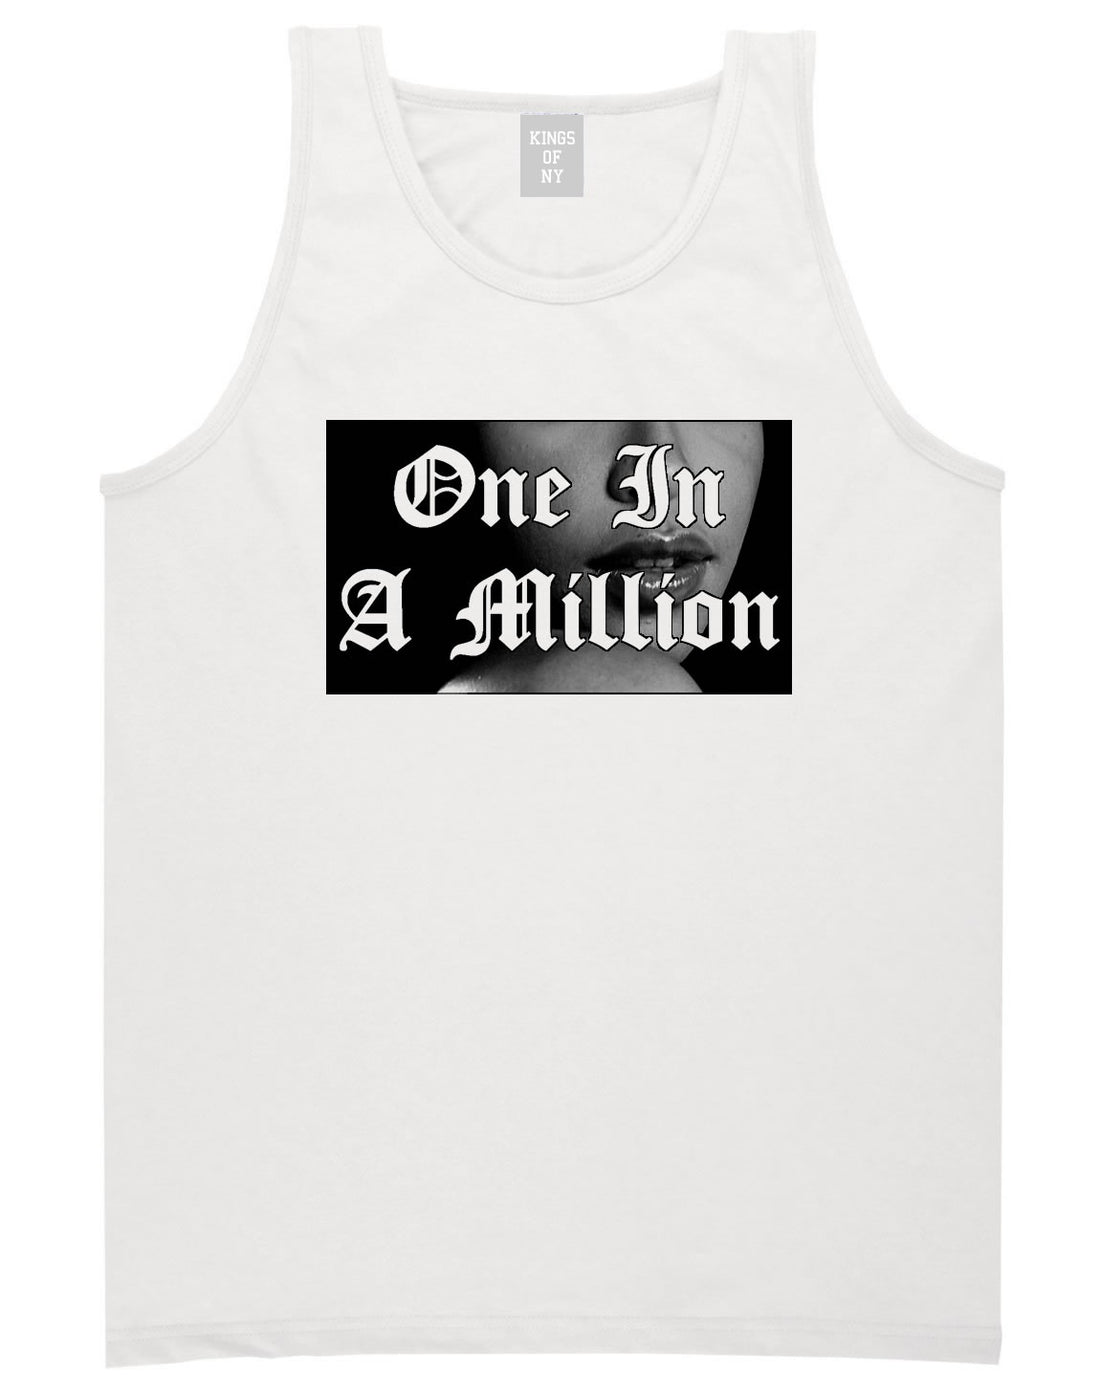 One in a Million Aaliyah Tank Top By Kings Of NY